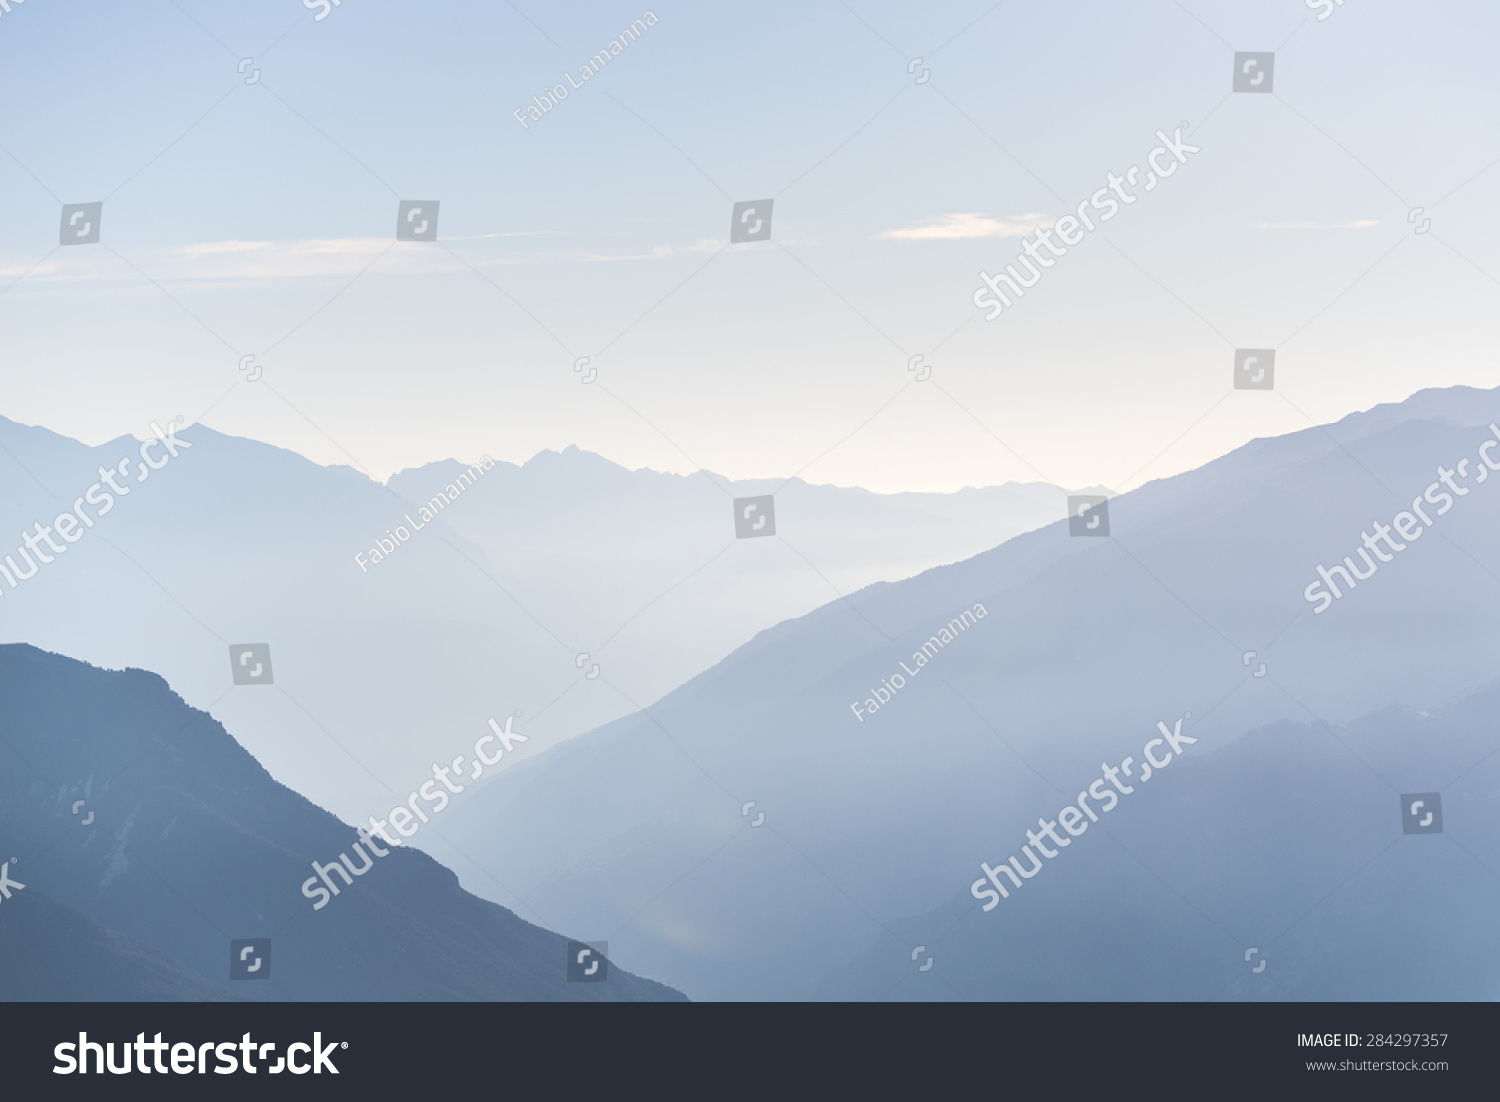 Telephoto View Of Distant Blue Toned Mountain Range At Sunrise With ...